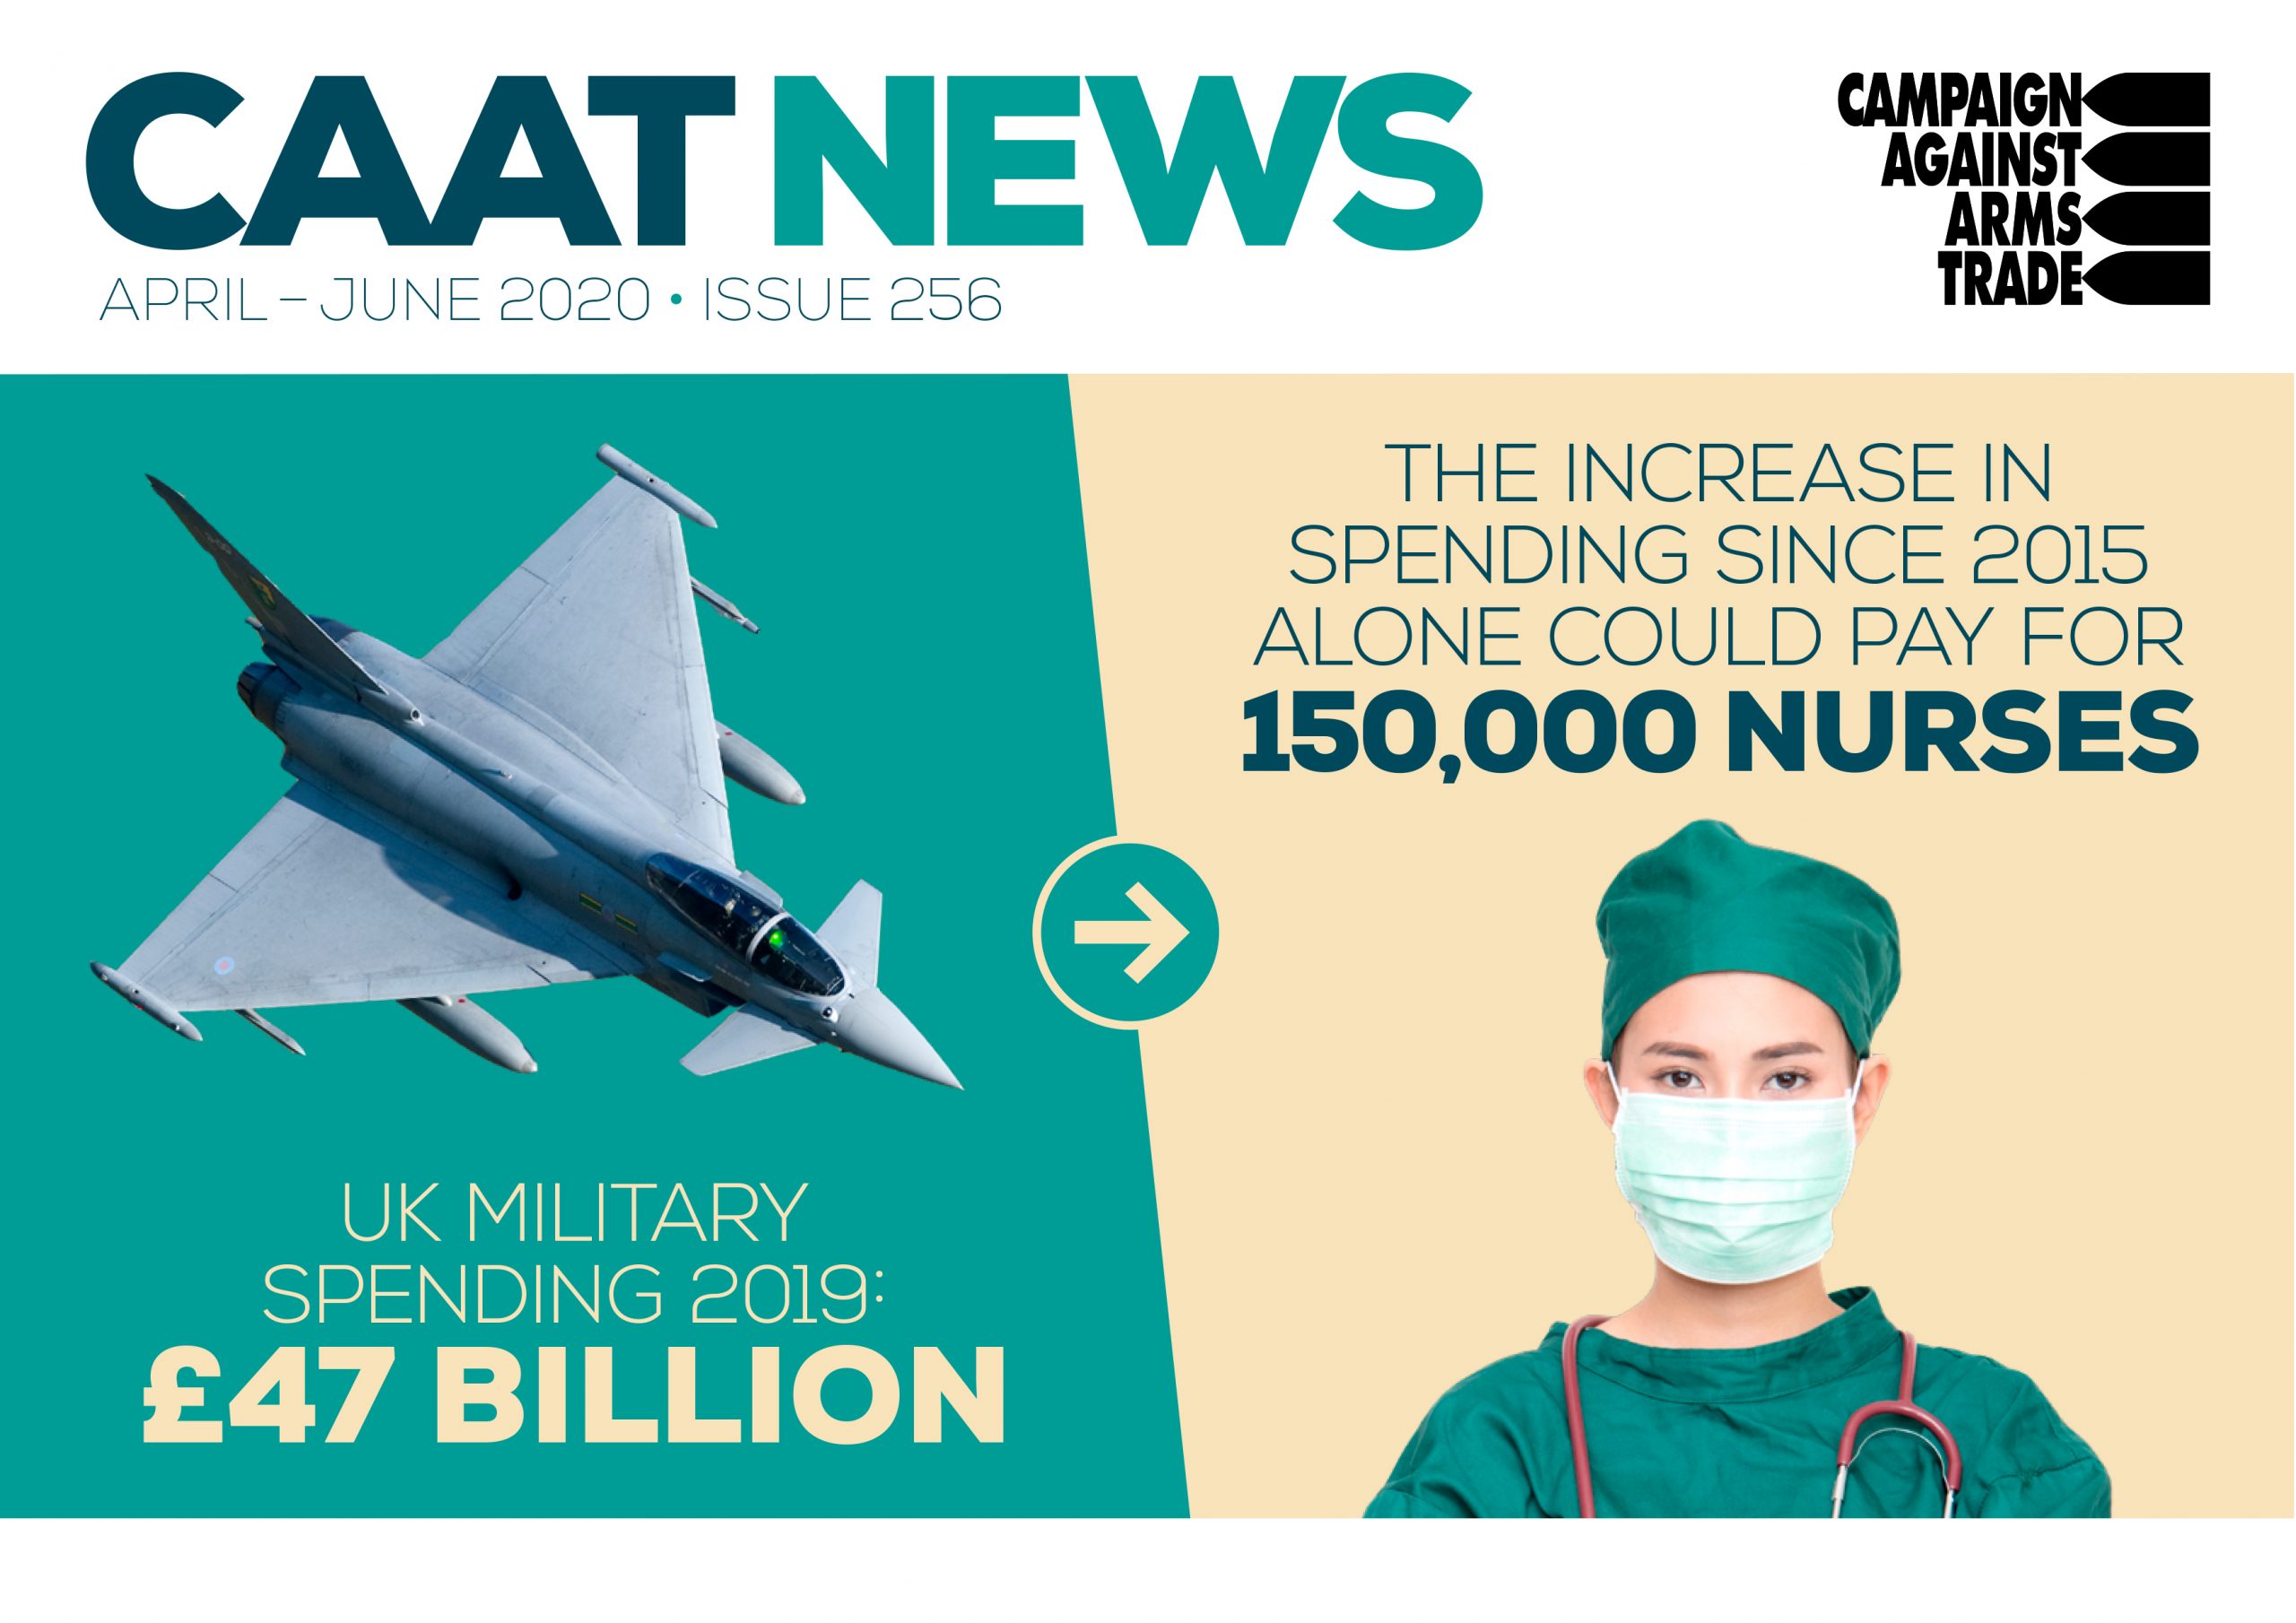 Cover of CAAT News issue 256 with graphic of fighter jet and medical professional. Text reads "UK military spending 2019: £47 billion, the increase in spendingsince 2015 alone could pay for 150,000 nurses."